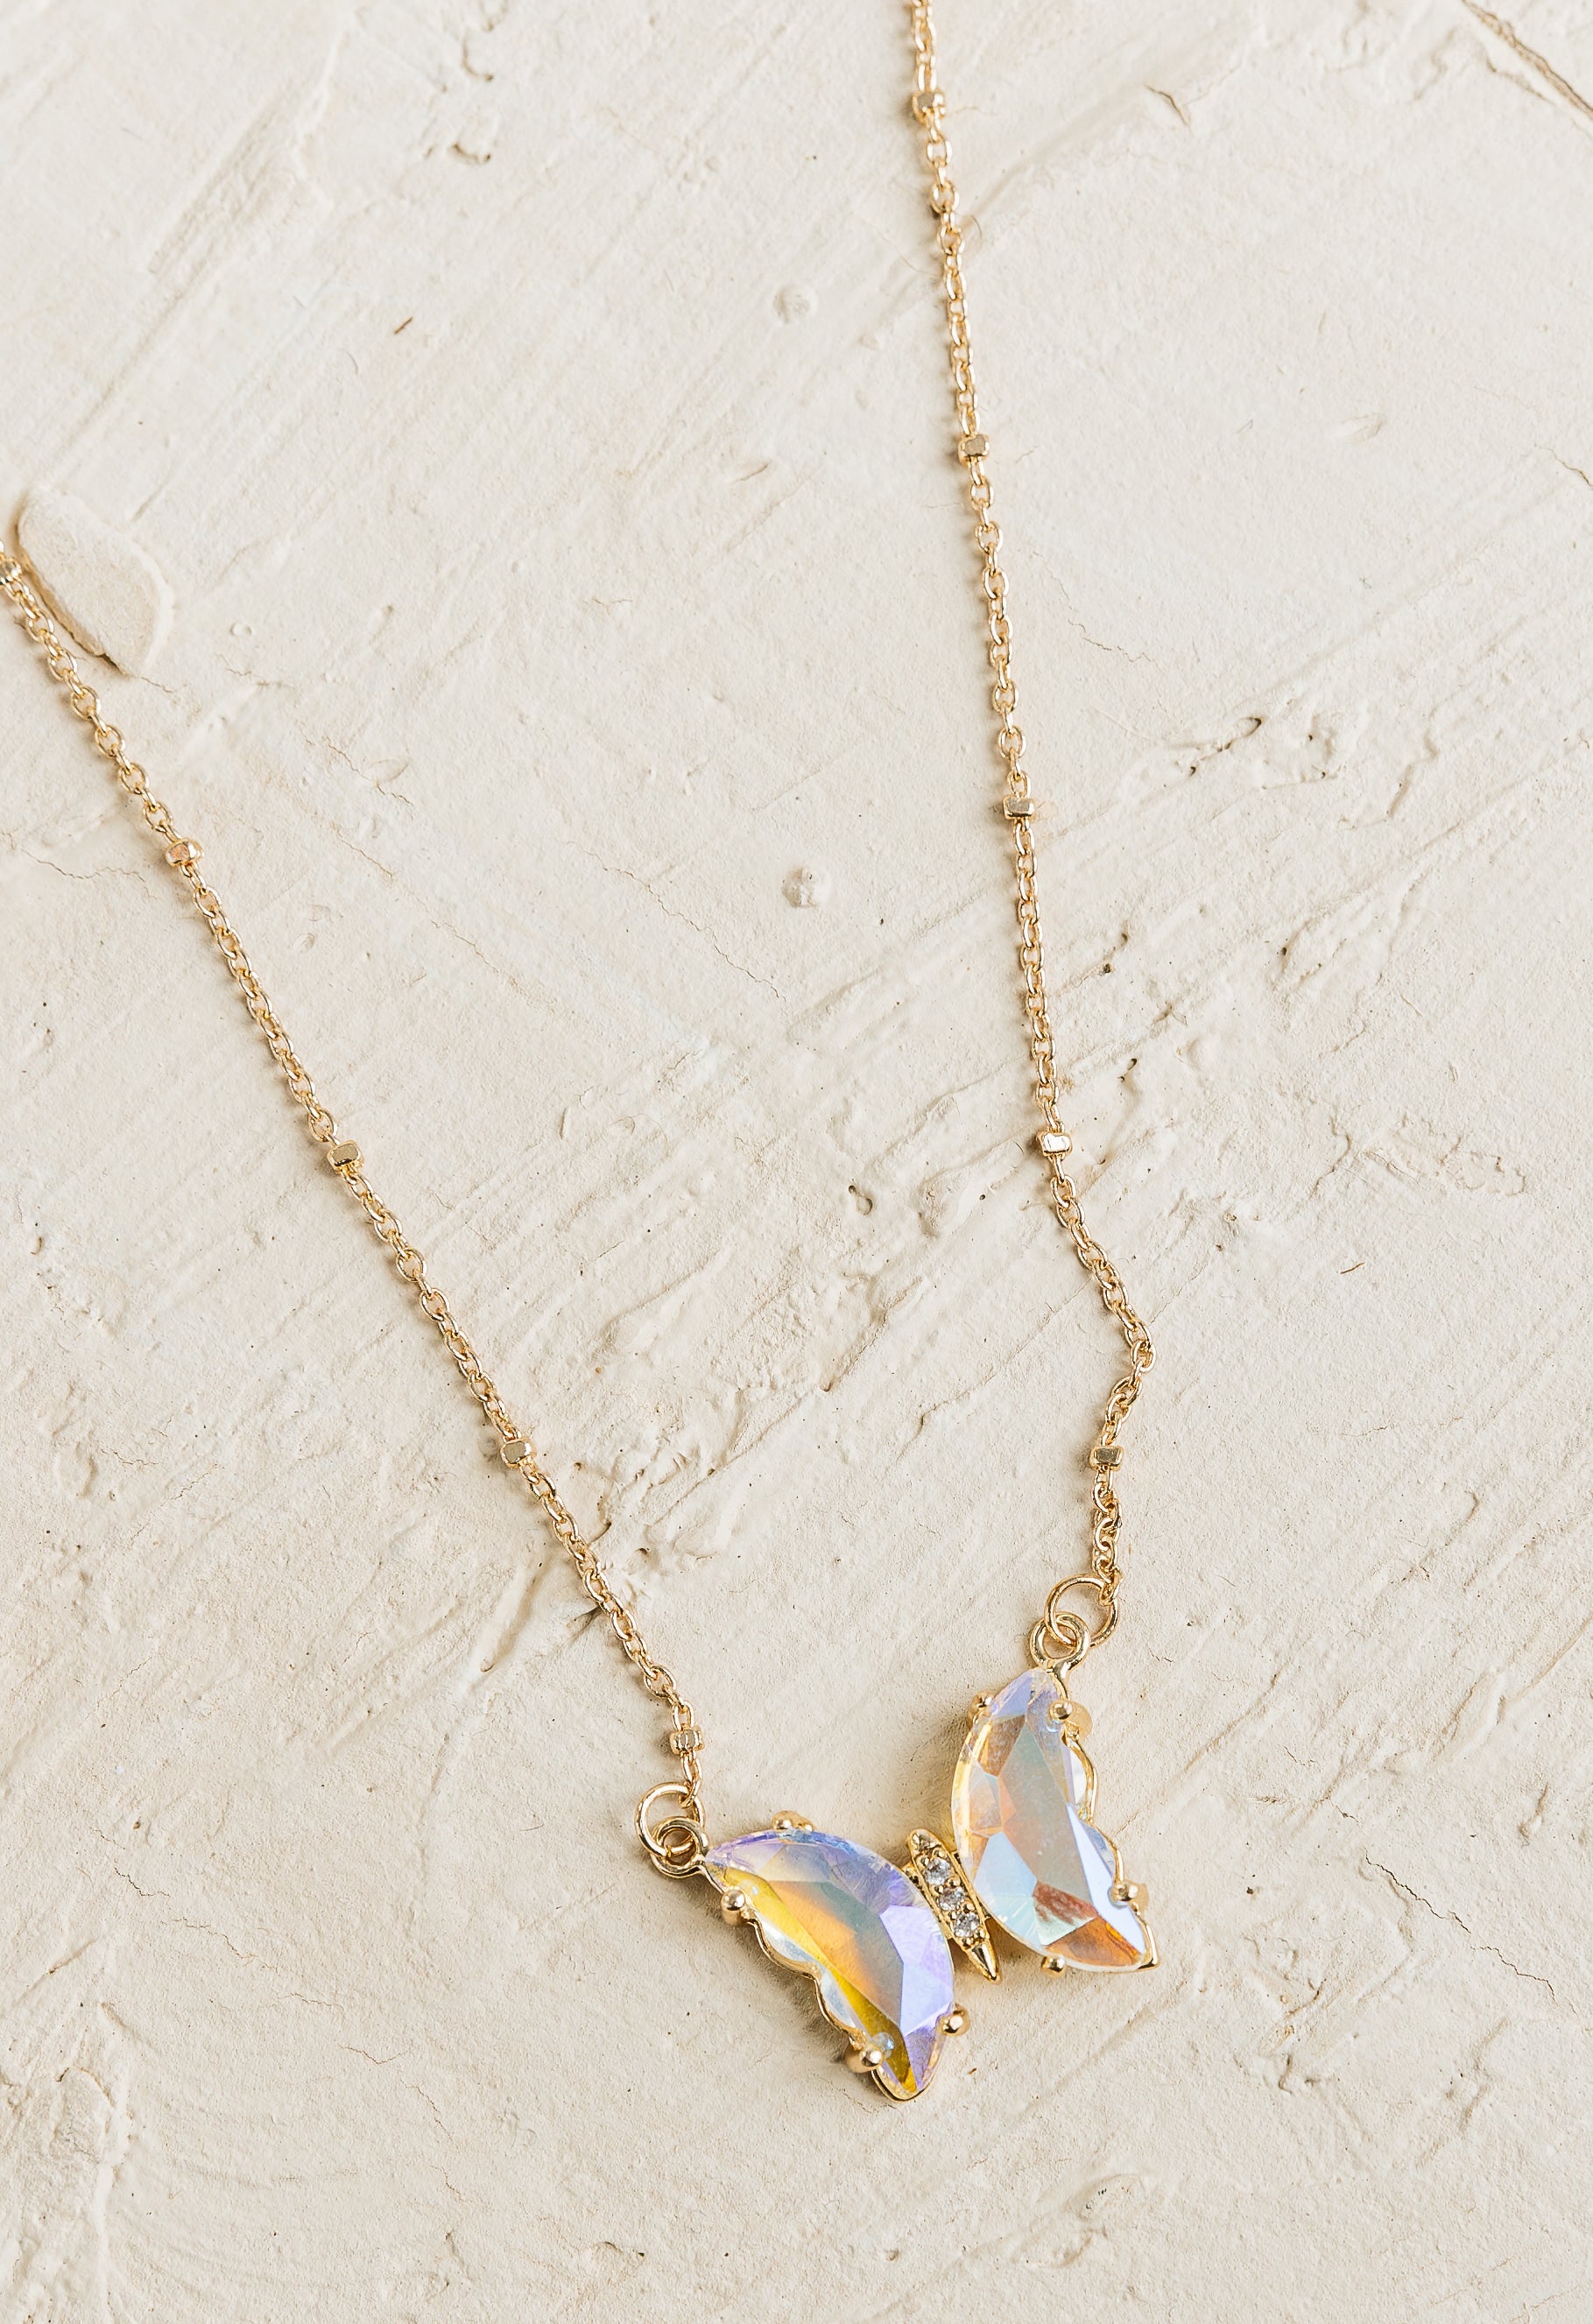 Chrysalis Necklace - GOLD - willows clothing NECKLACES